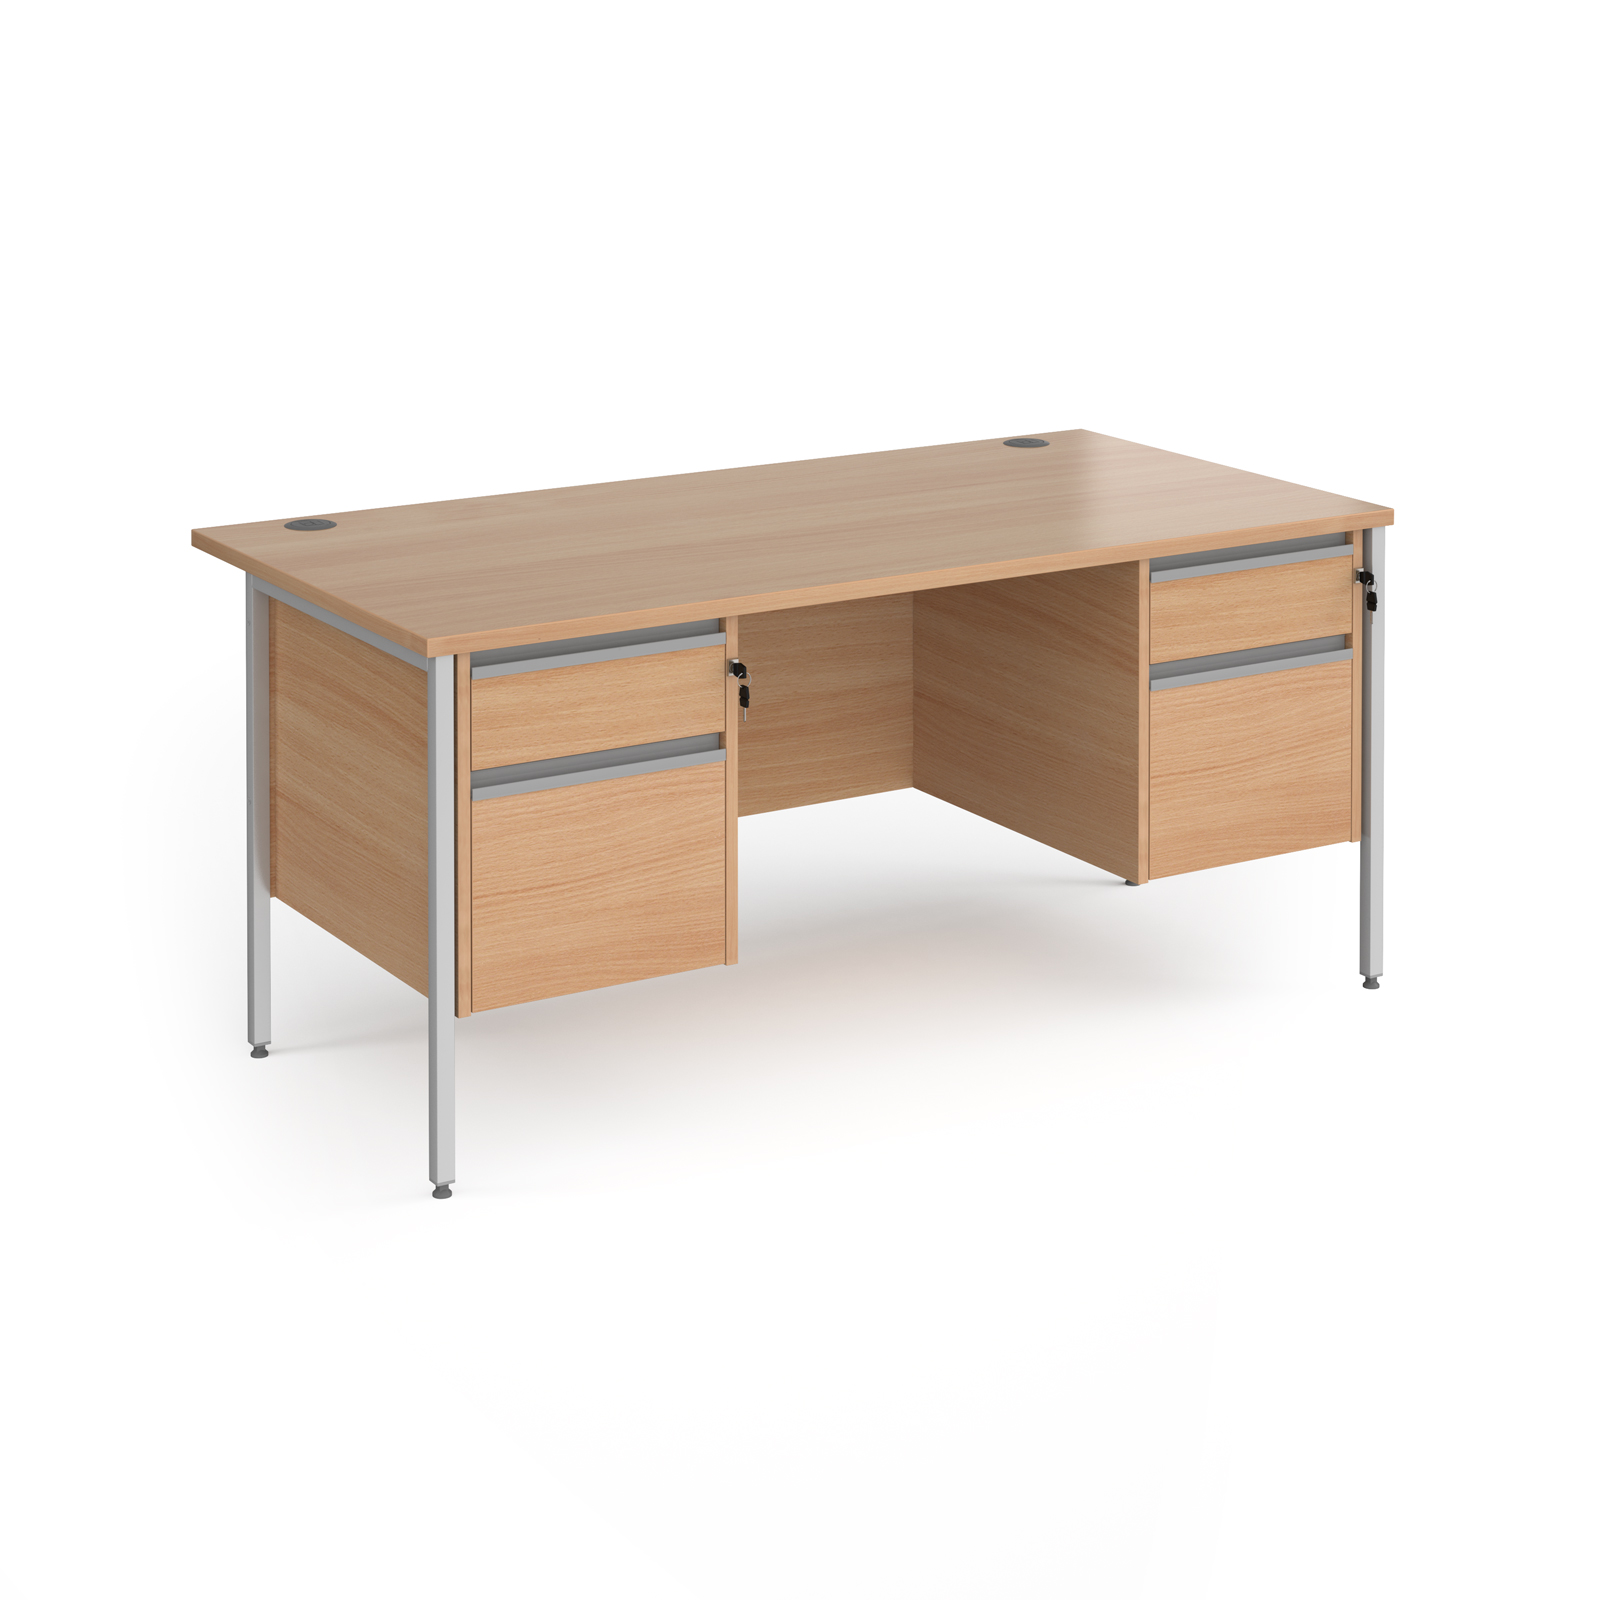 Contract 25 H-Frame straight desk with 2 and 2 drawer peds